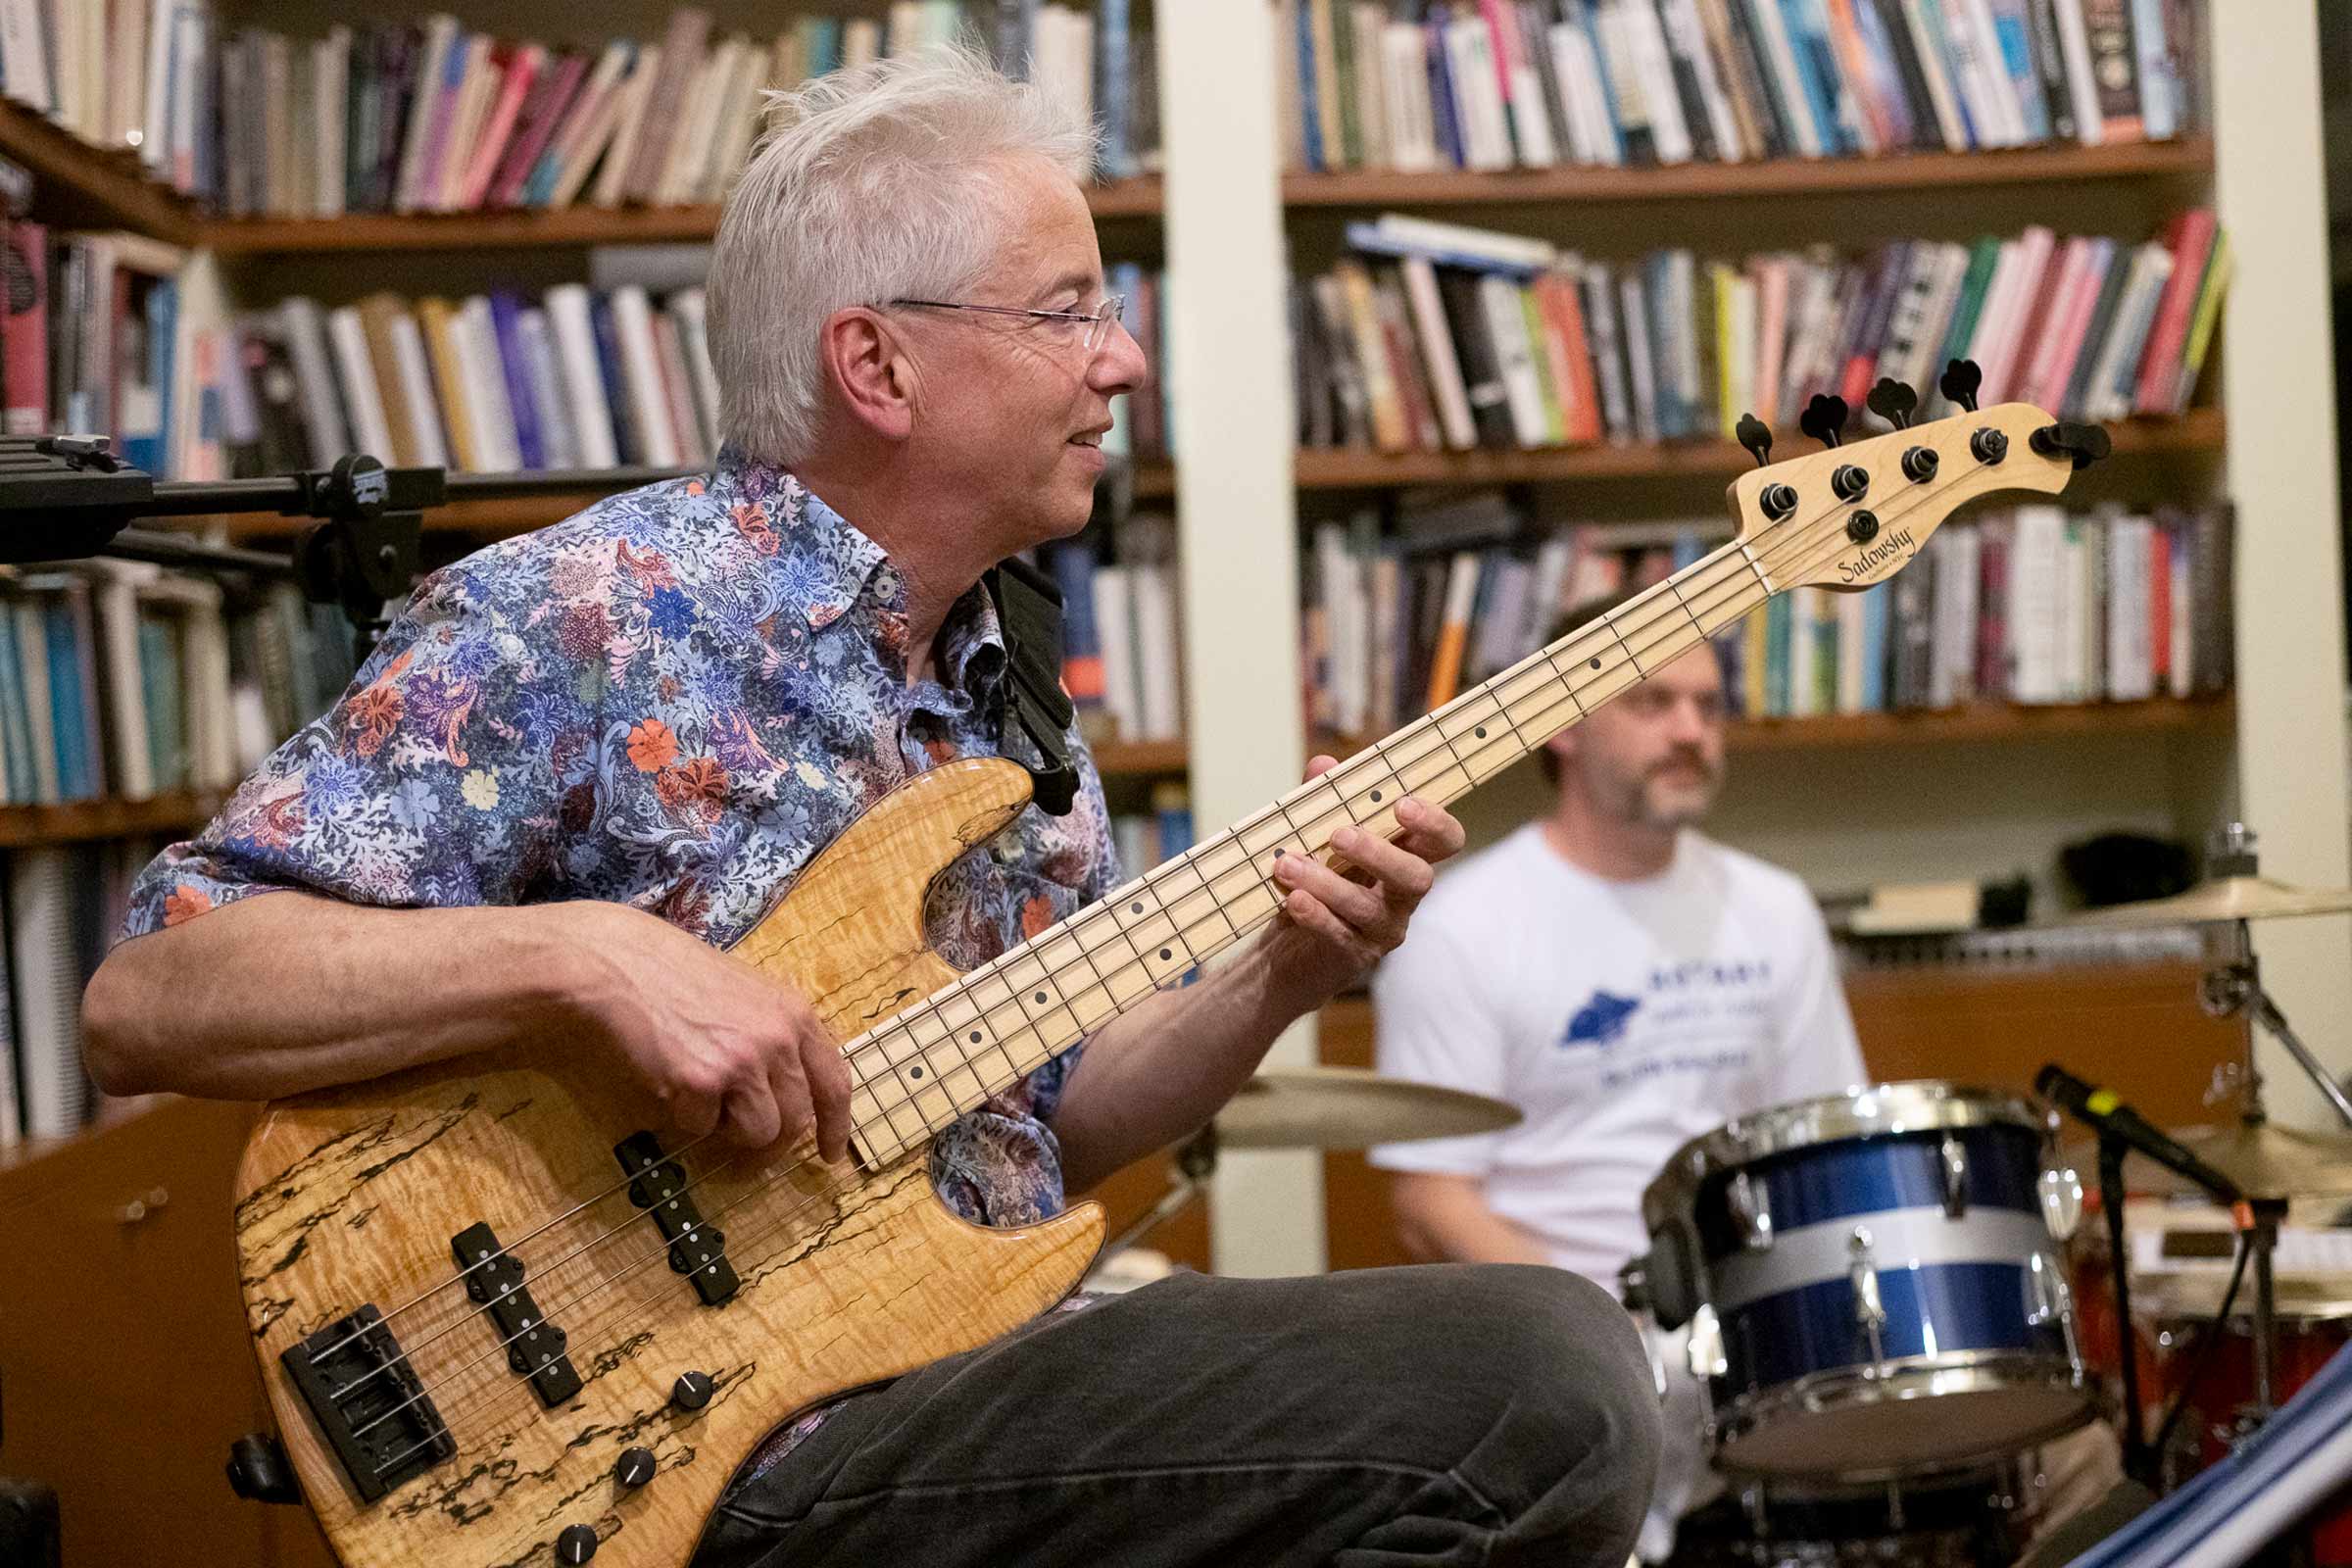 Marc Lipson plays his bass seated in front of expansive bookshelves and smiles